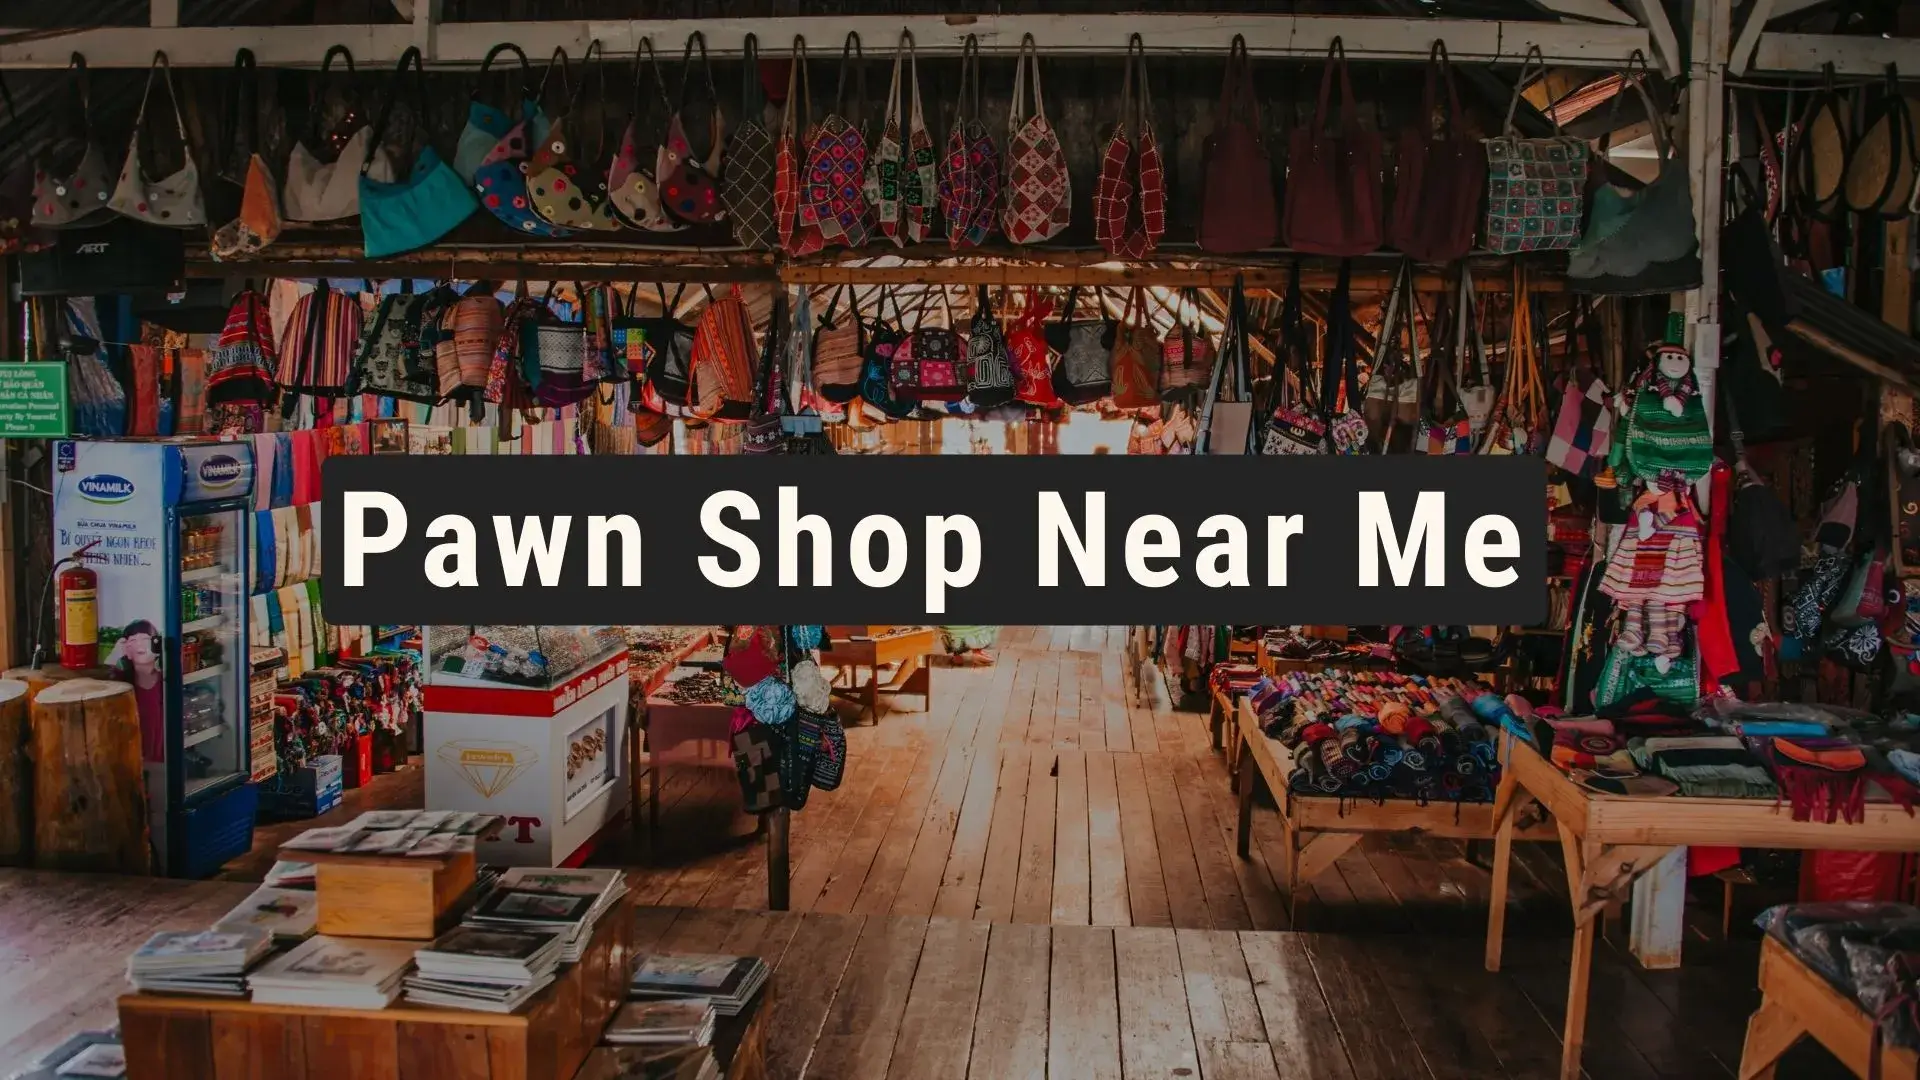 Are You Searching For Best Pawn Shops Near You | Then Read This Ultimate Guide To Discover Pawn Shops Near Me Locations & 24 Hour Pawn Shops.